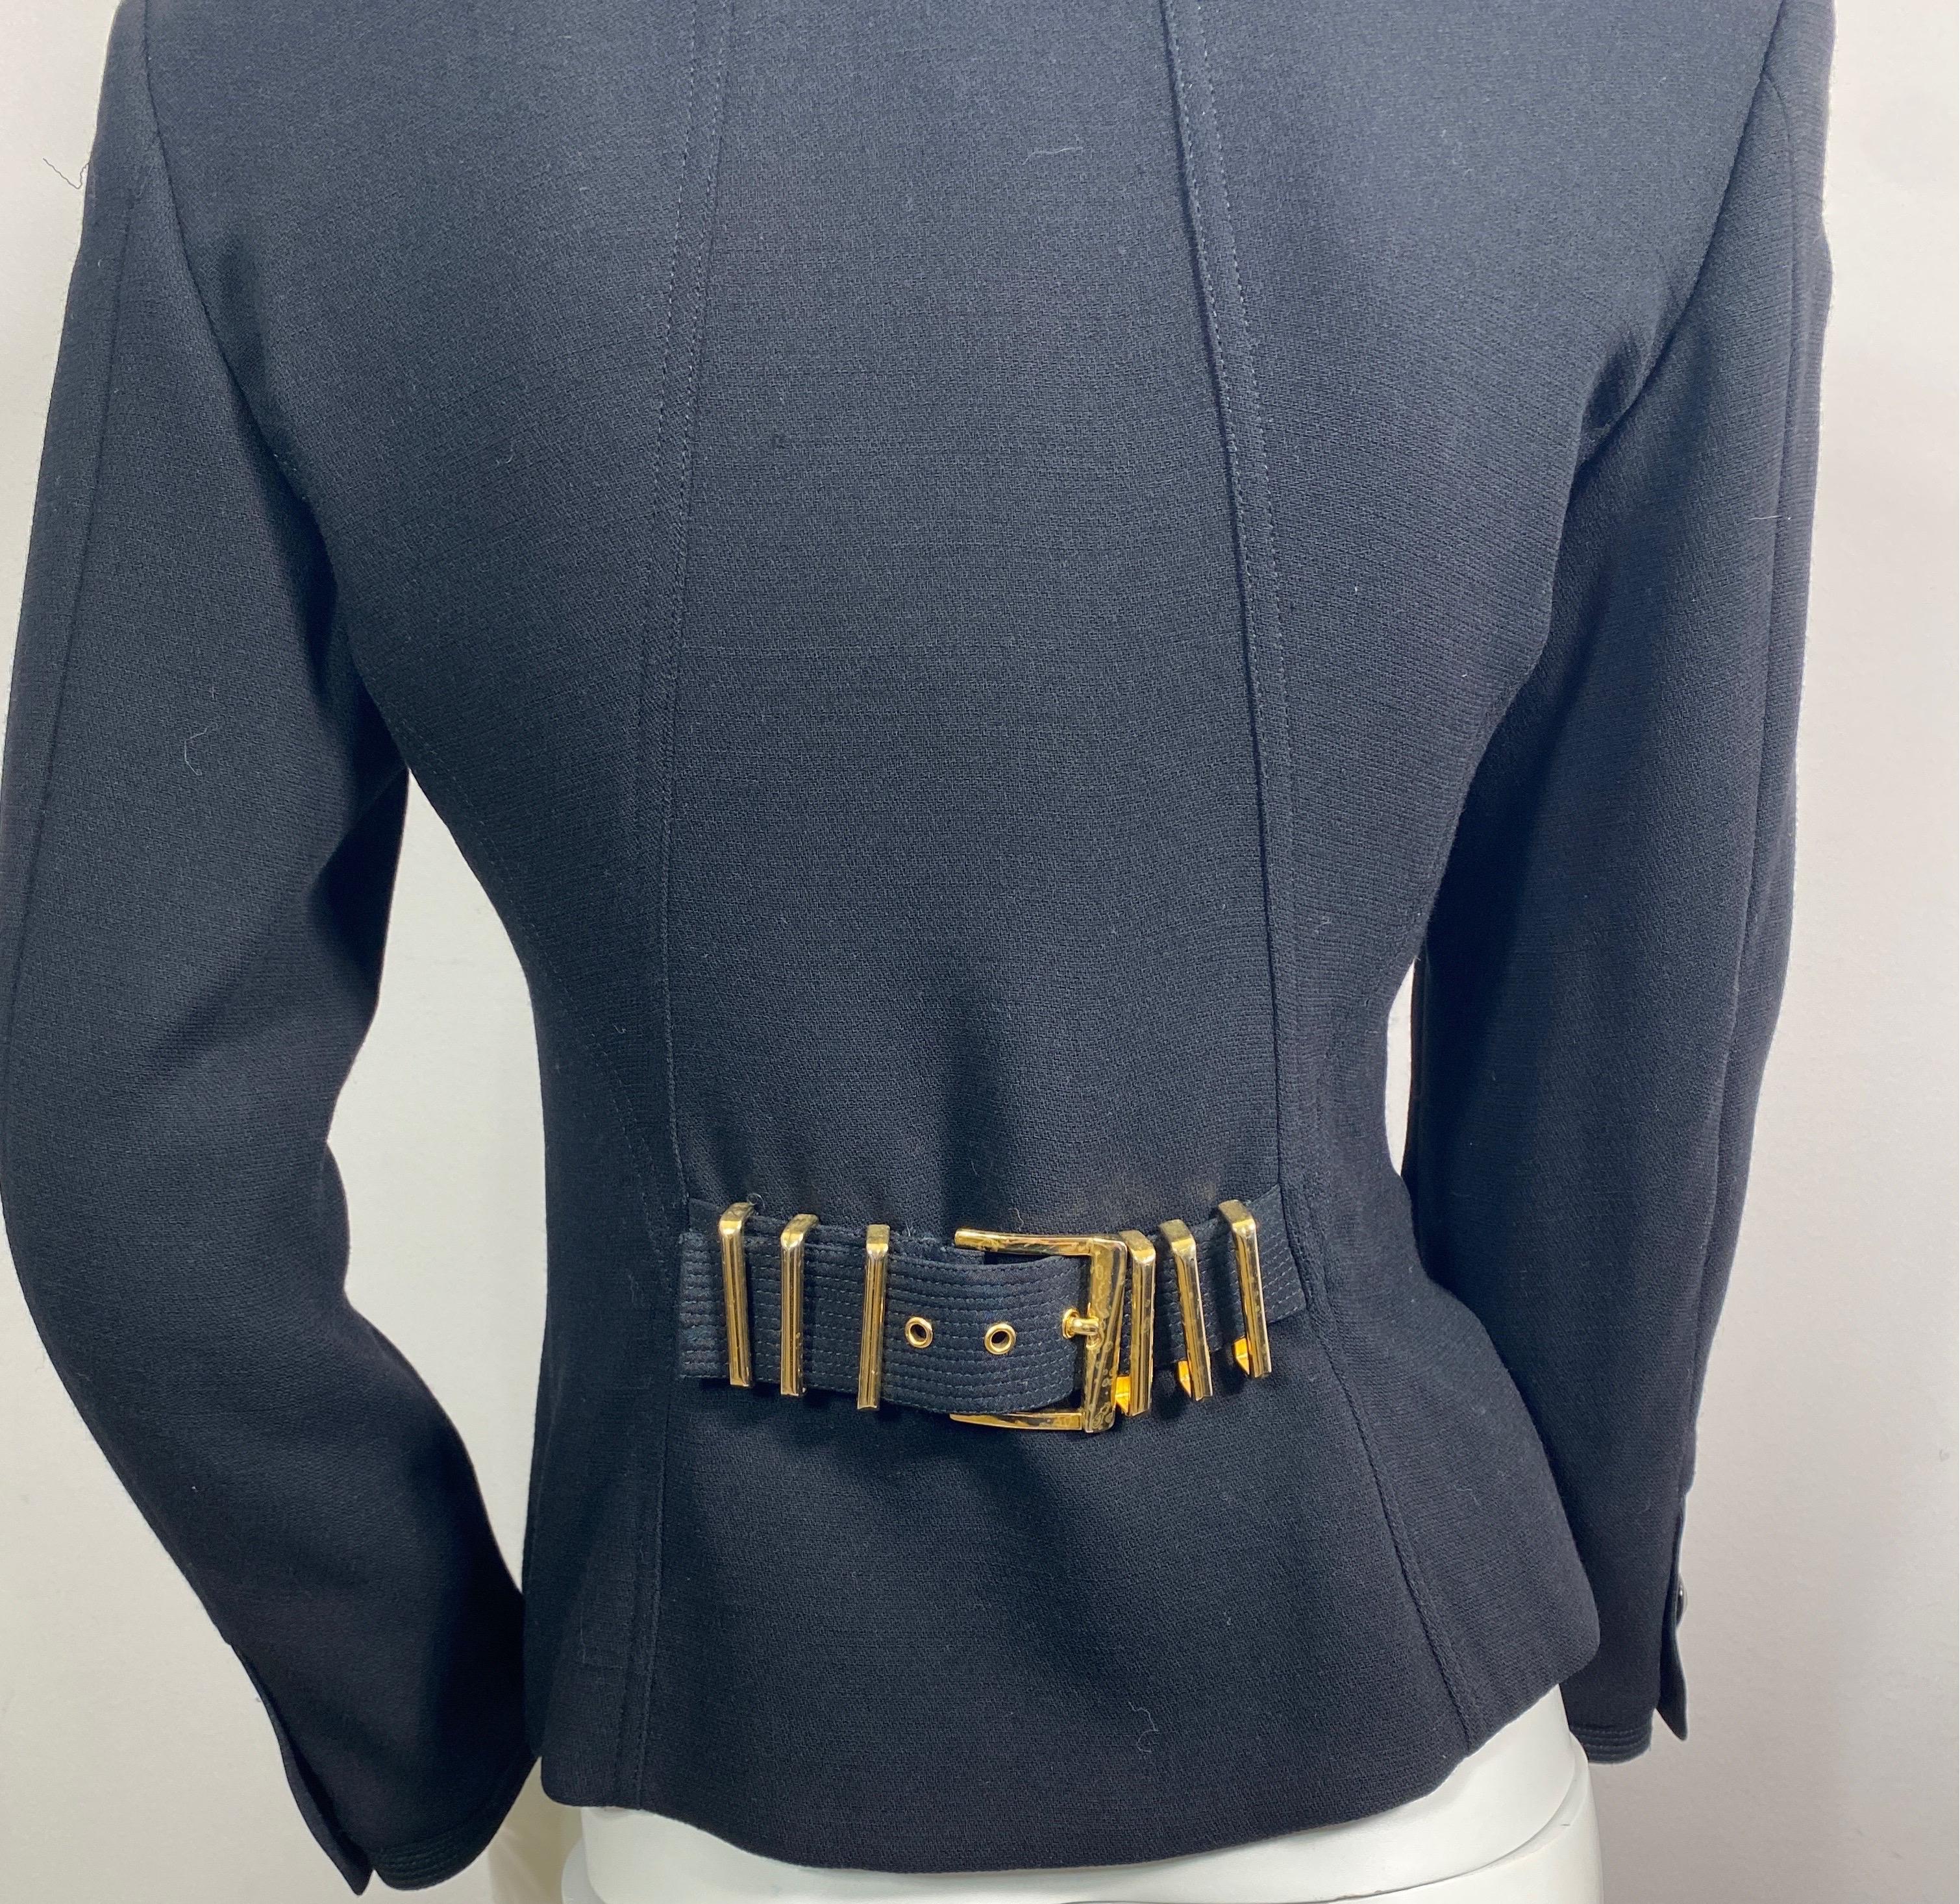 Gianni Versace Couture F/W 1992 Runway S&M Bondage Black Jacket-Size 6 For Sale 6